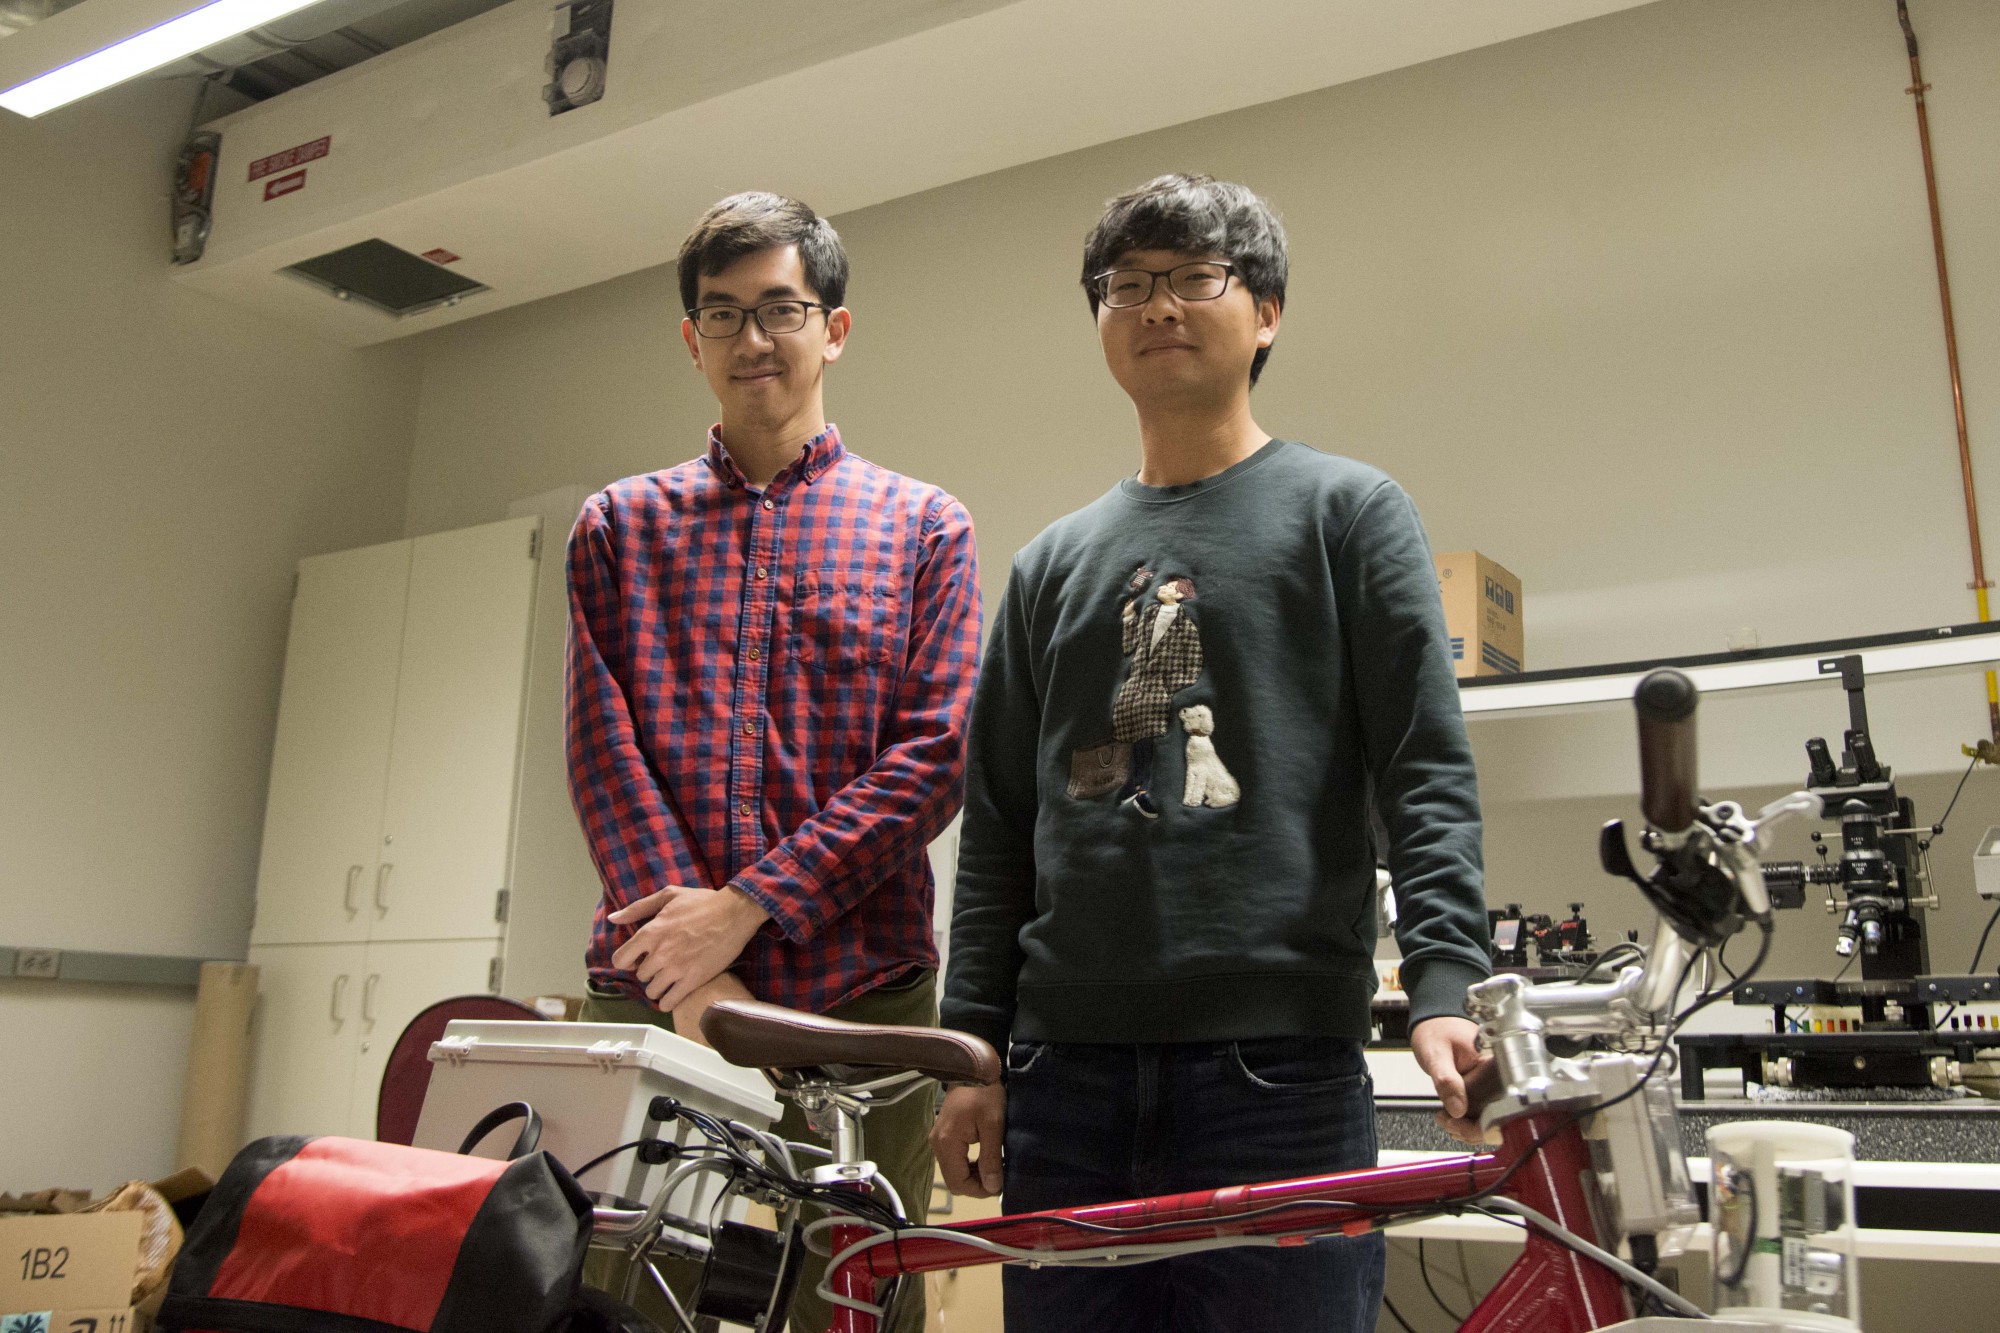 Zhenming Xiem, left. and Woongsun Jeon, right, pose for a portrait in the Mechanical Engineering building on Monday, Nov. 4. Xiem and Jeon have been working on a prototype bike system since 2015 to help improve cyclist safety. 